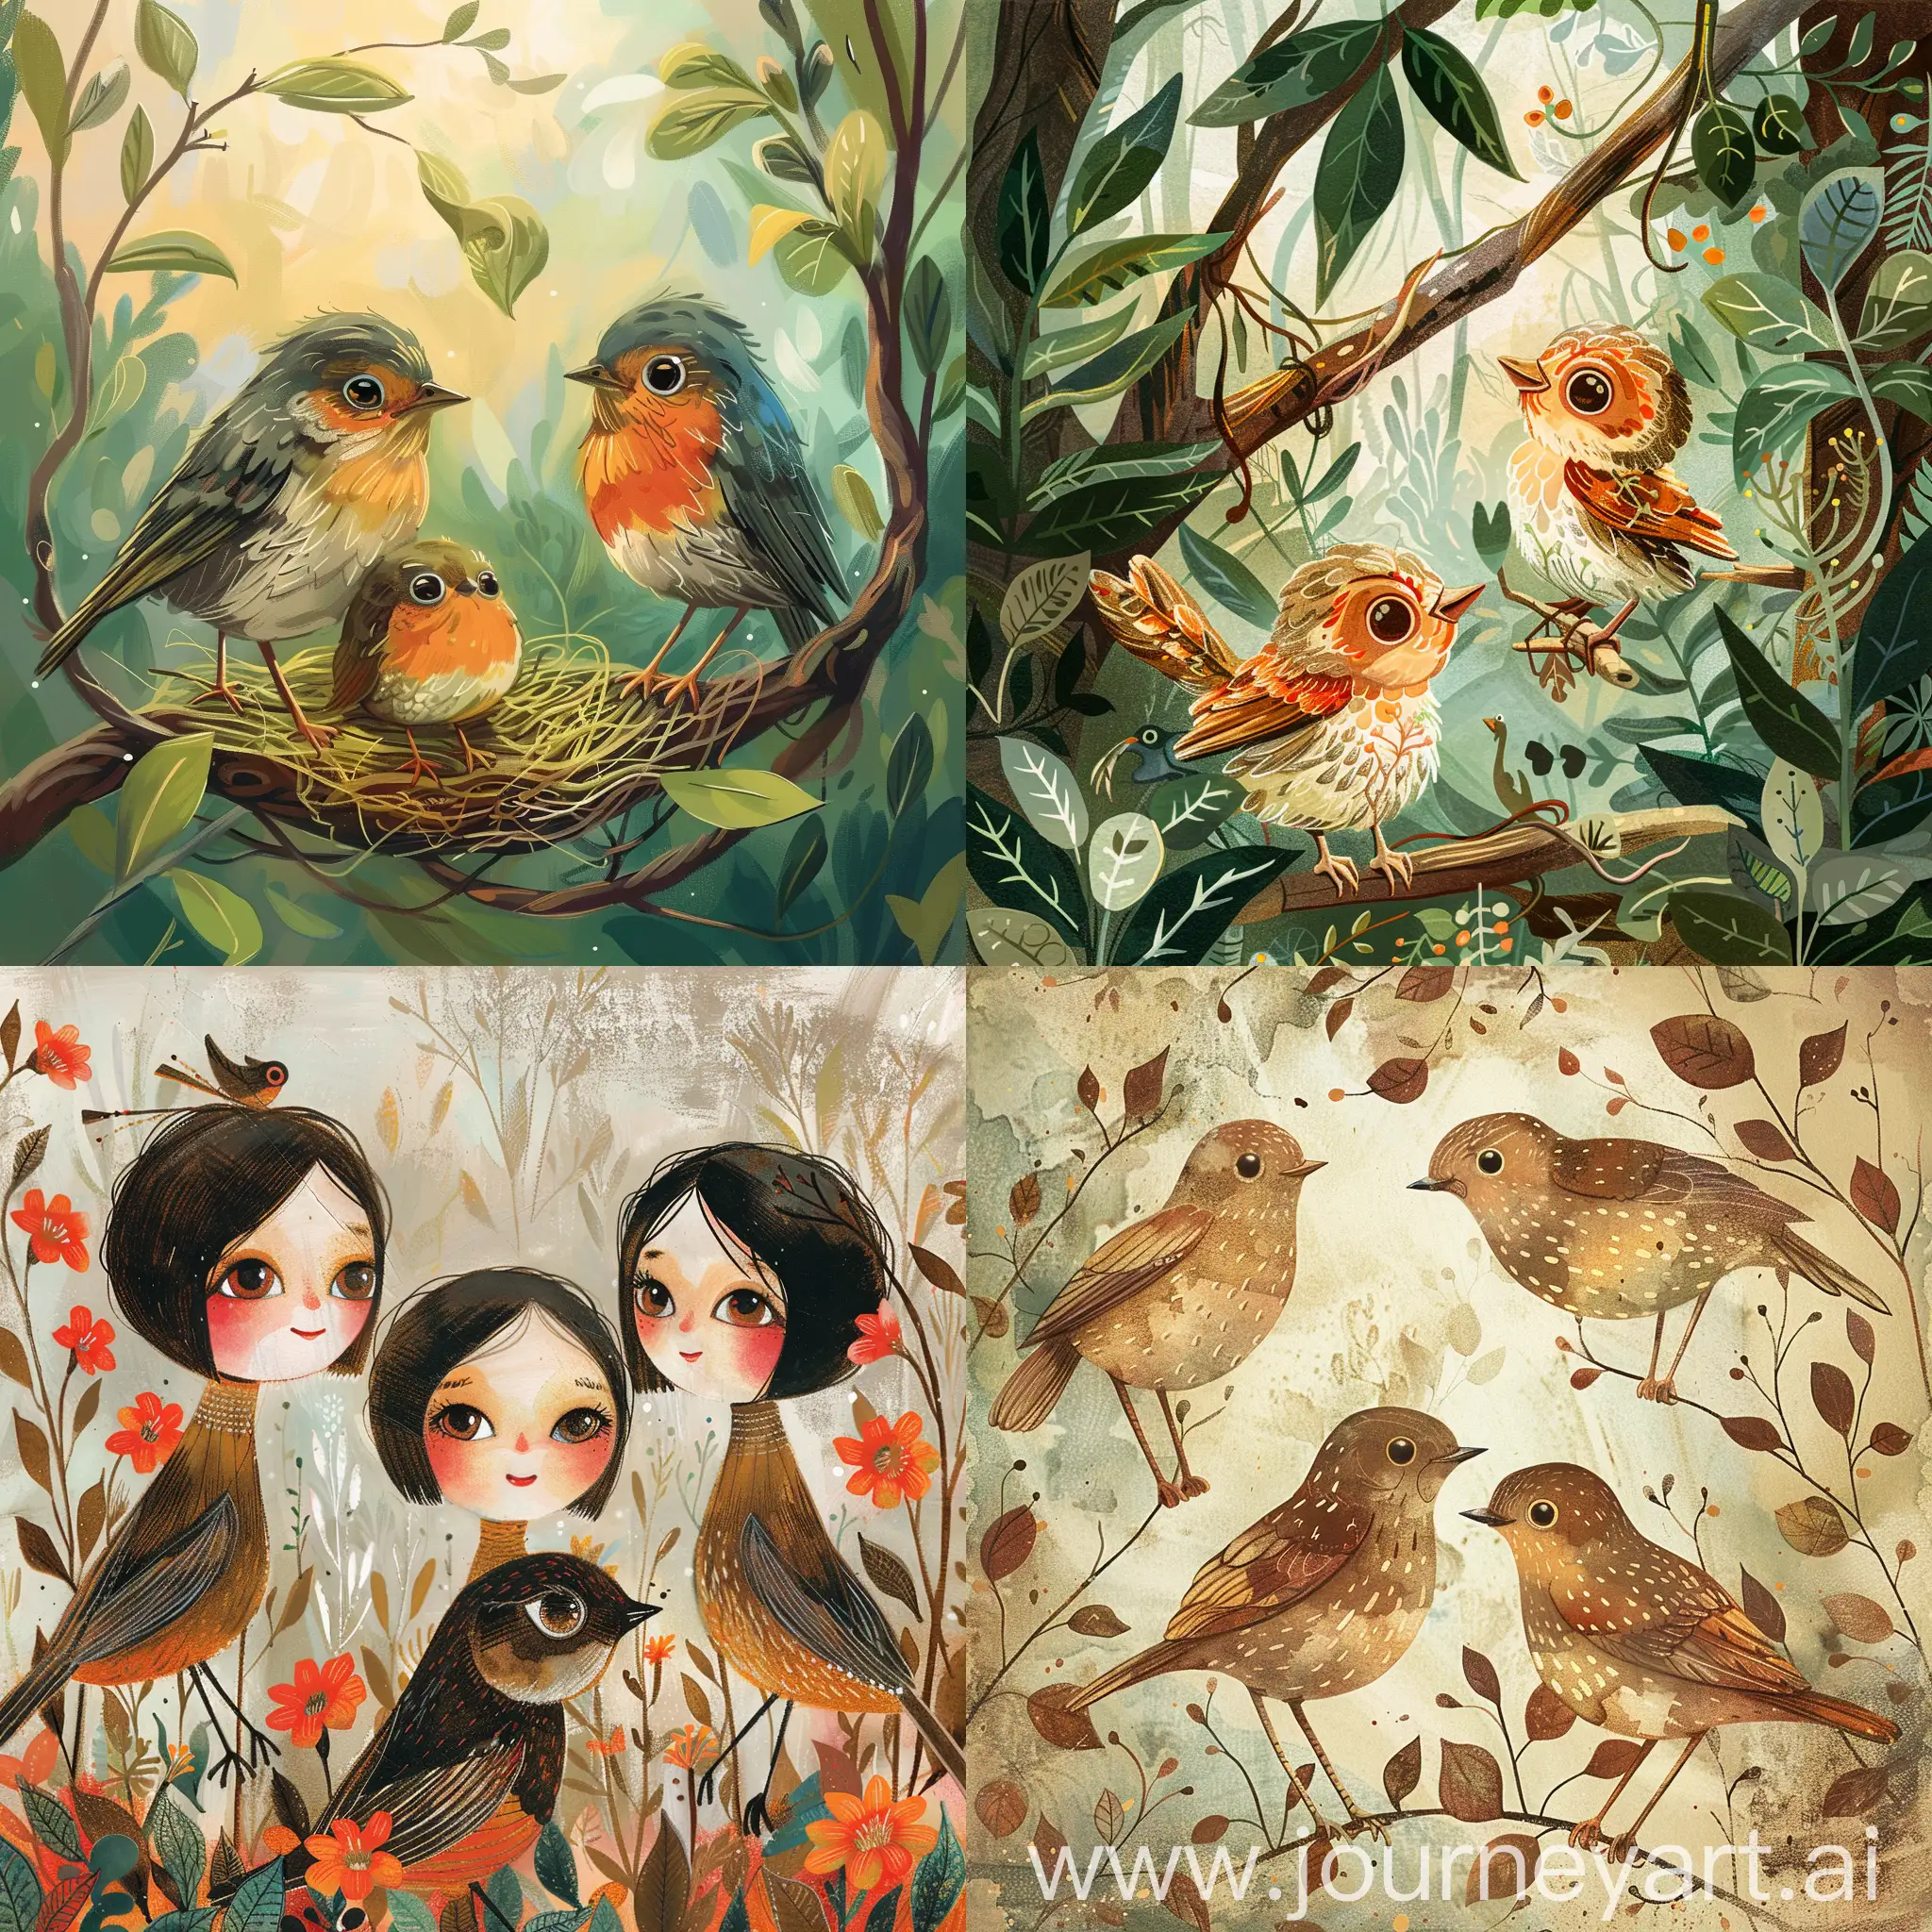 Charming-Childrens-Book-Illustration-Three-Sisters-of-the-Bird